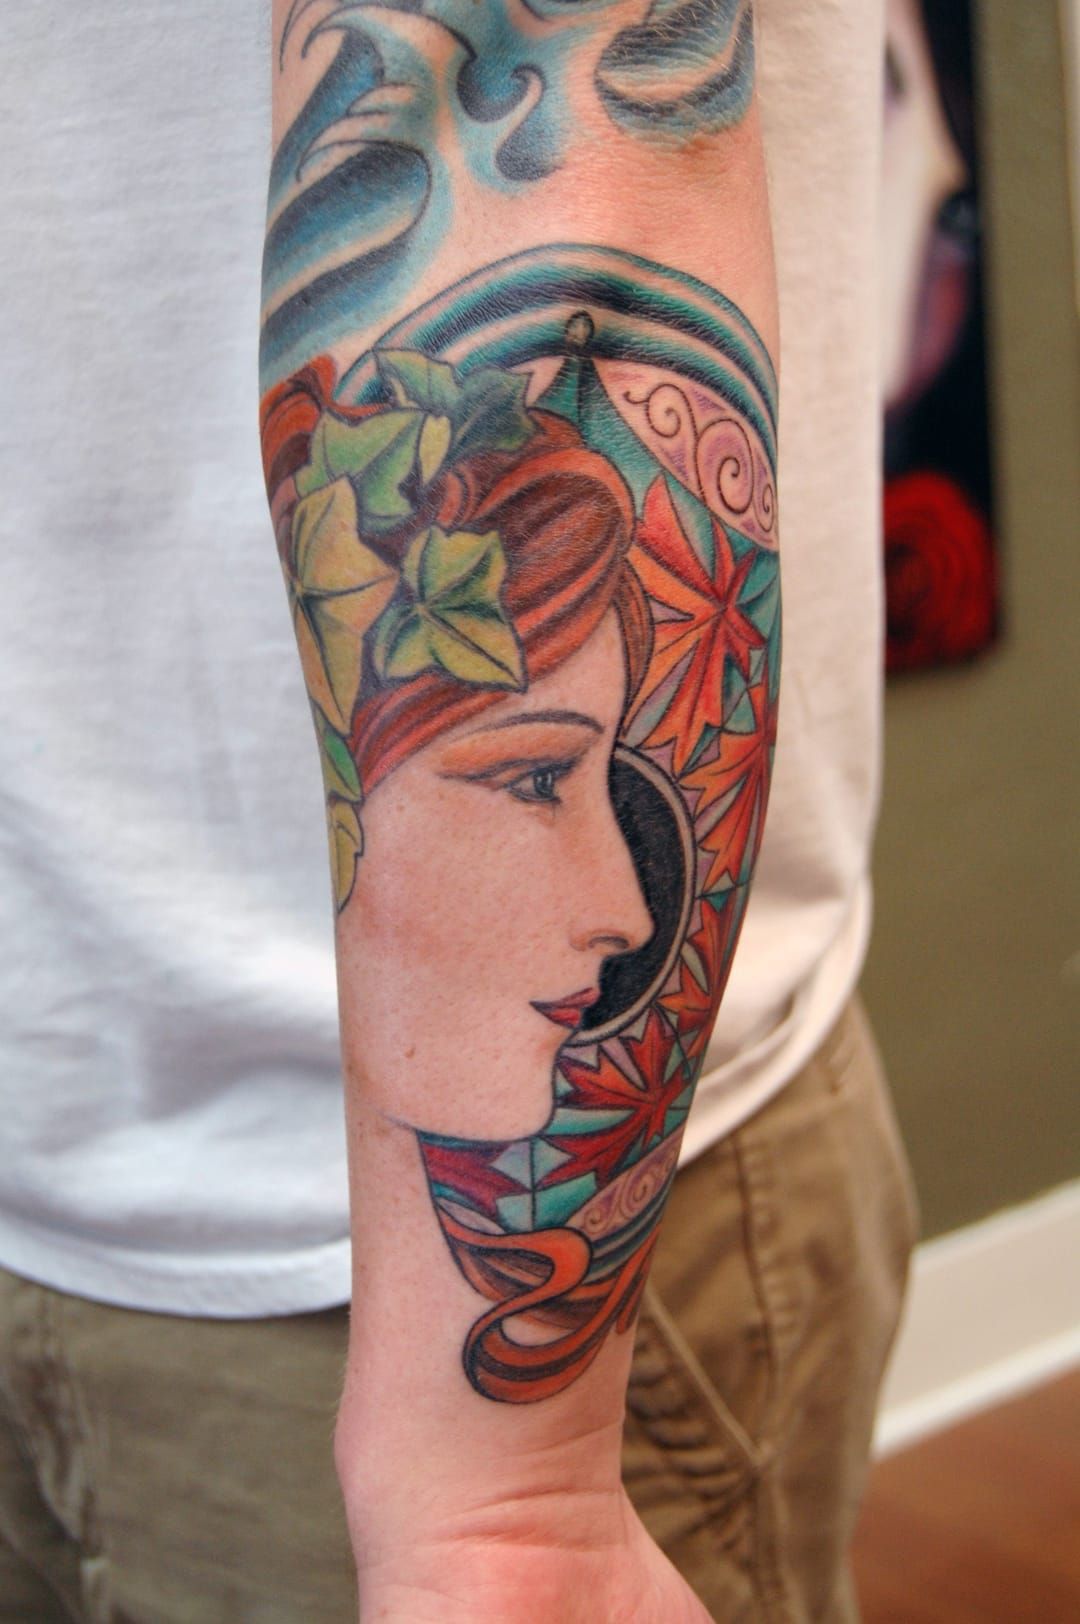 This lovely tattoo is faithful to the Art Nouveau's spirit, by Stéphanie Washburn